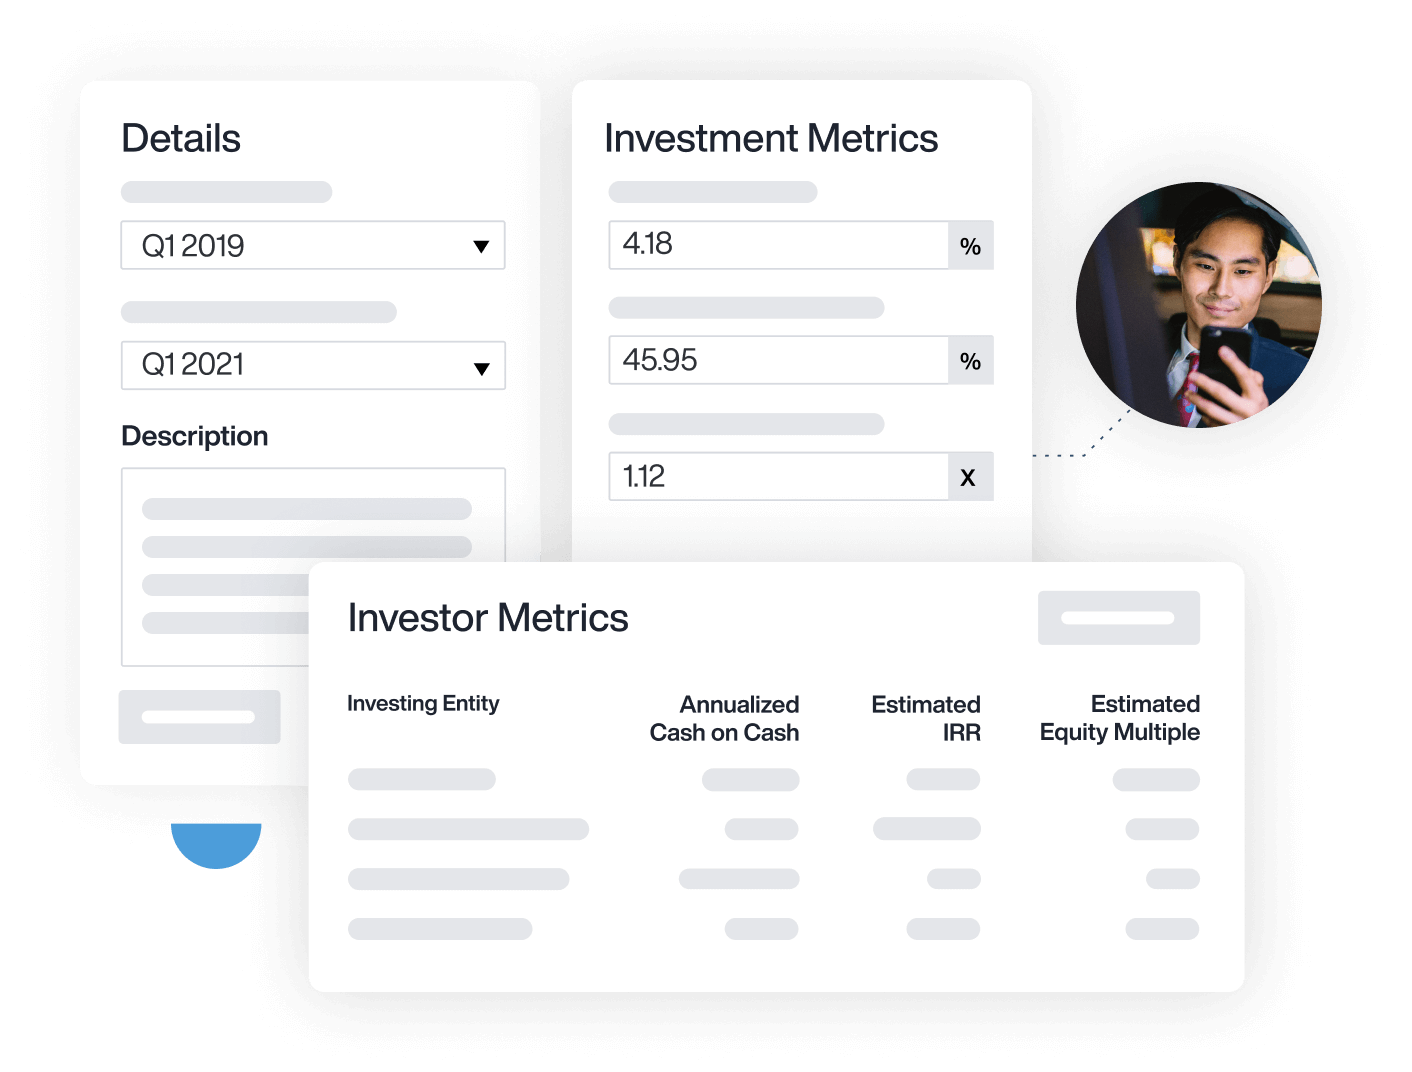 AppFolio Investment Management interface windows of Details, Investment Metrics, and Investor Metrics, with a circle shaped photo of a man using a mobile device and a blue half circle shape in the foreground.